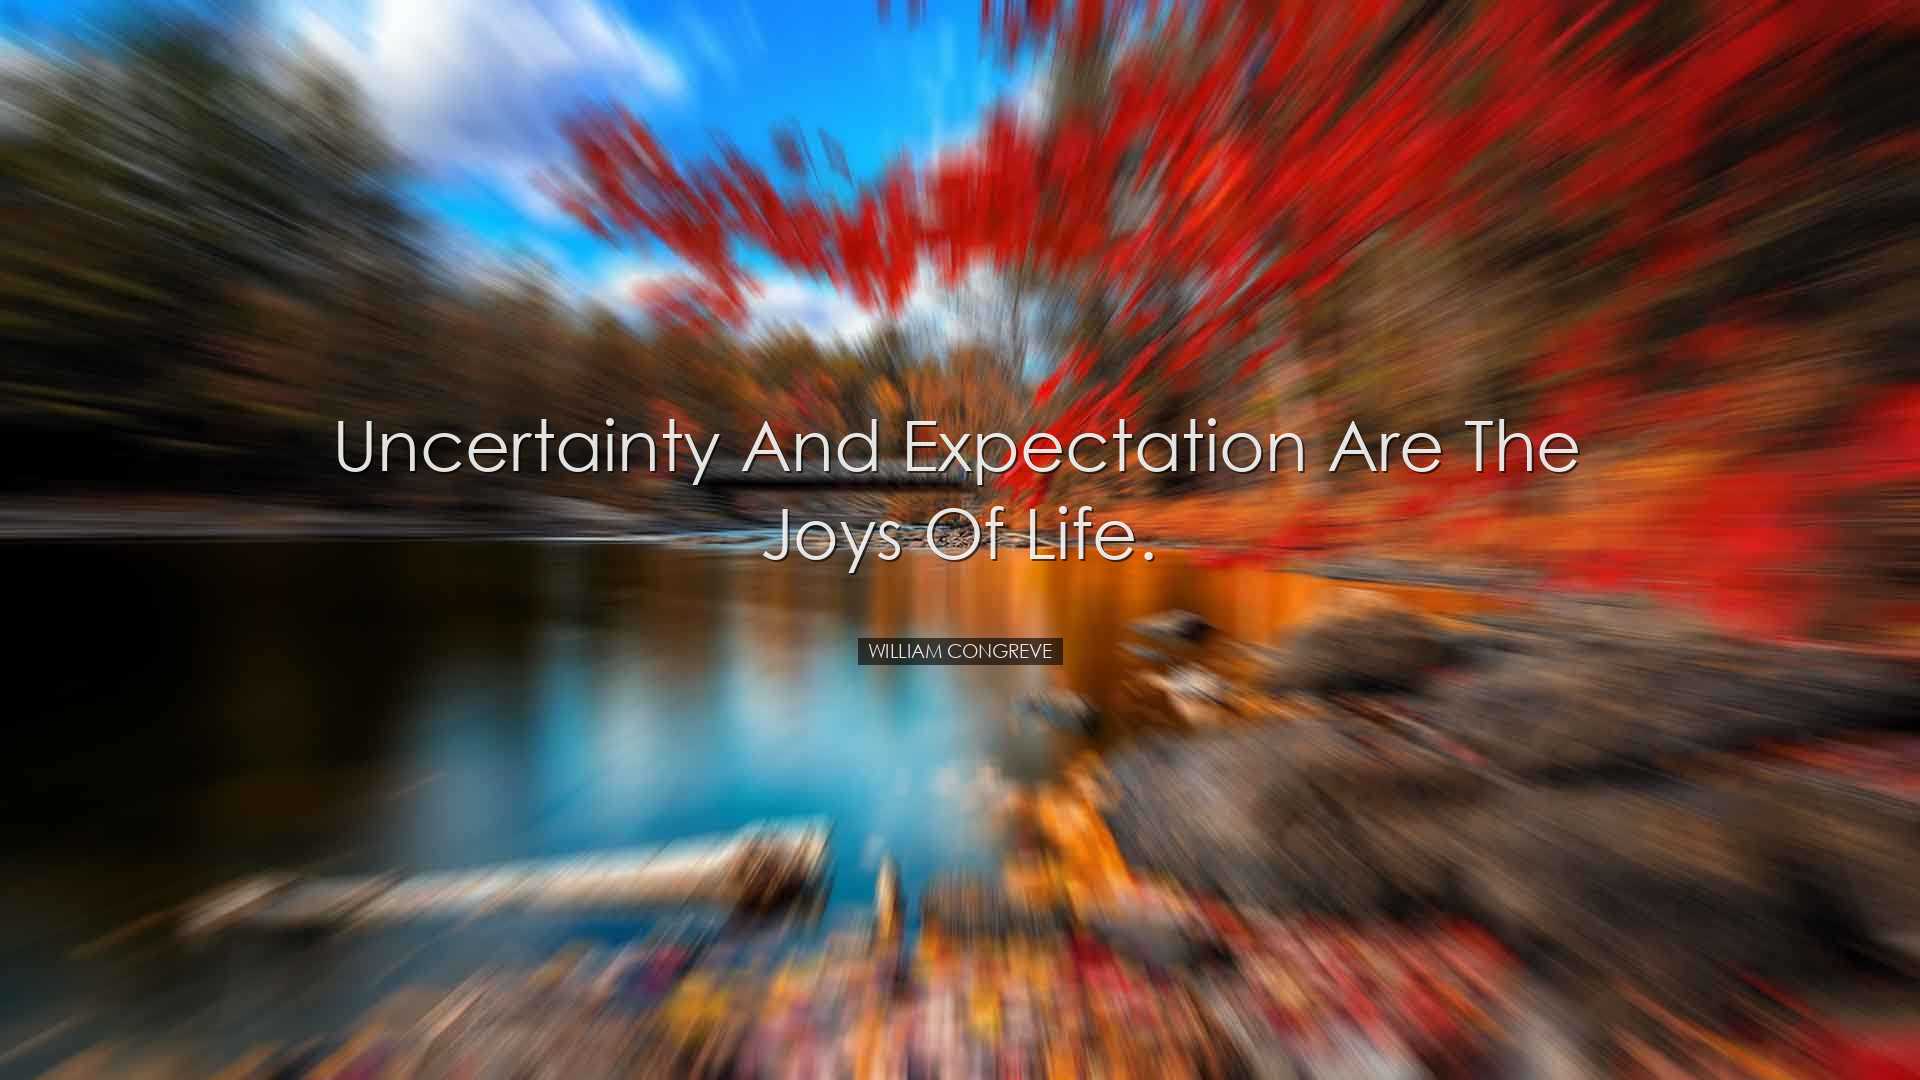 Uncertainty and expectation are the joys of life. - William Congre